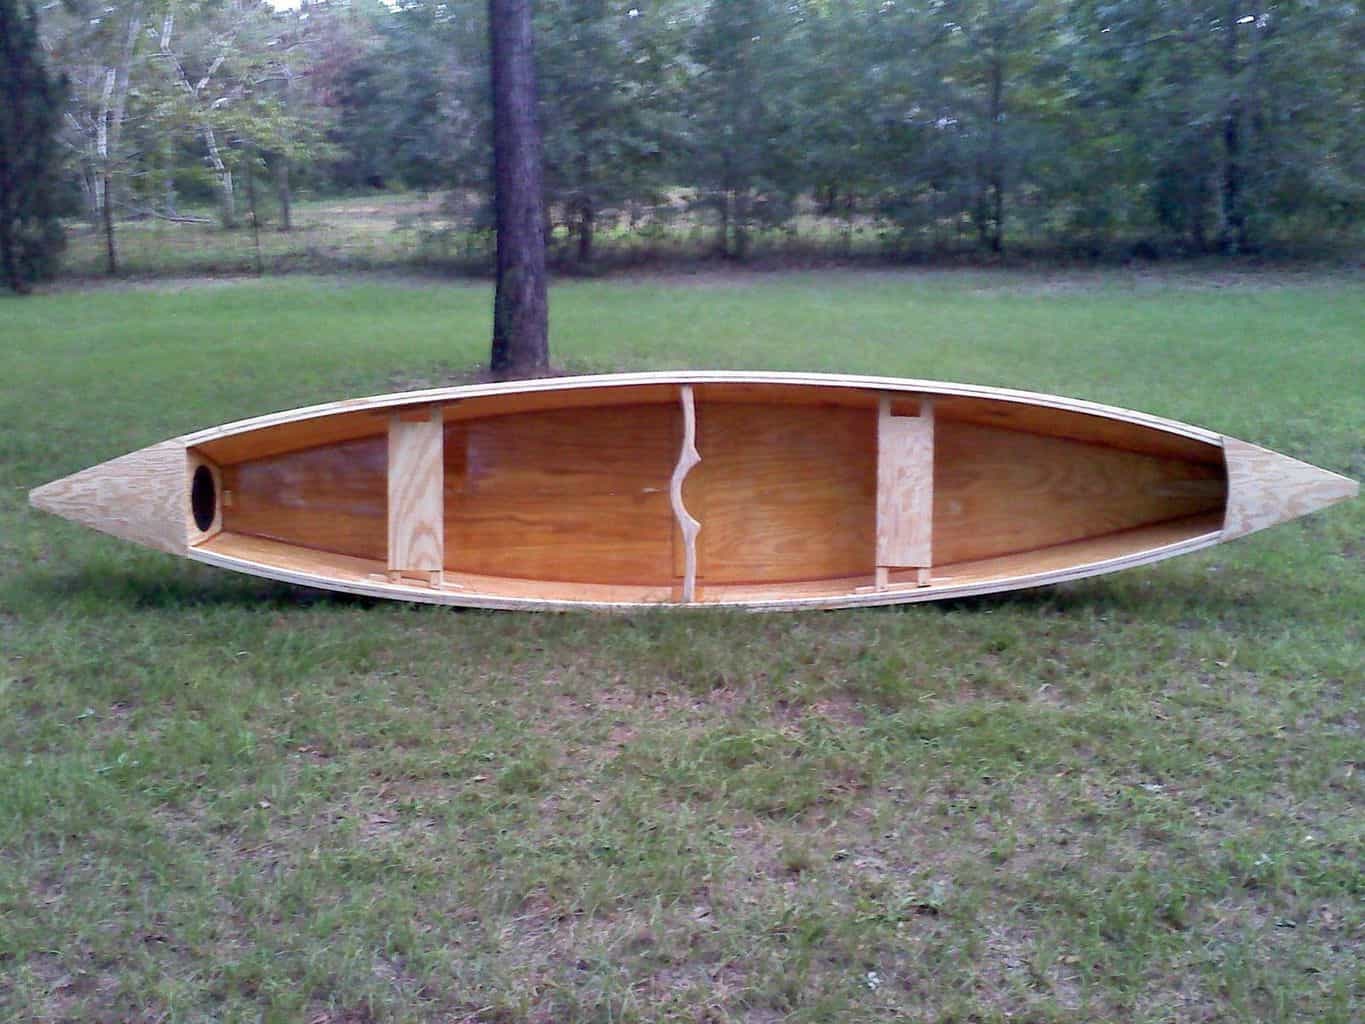 Phil and his Quick Canoe, Touring in a simple plywood canoe.